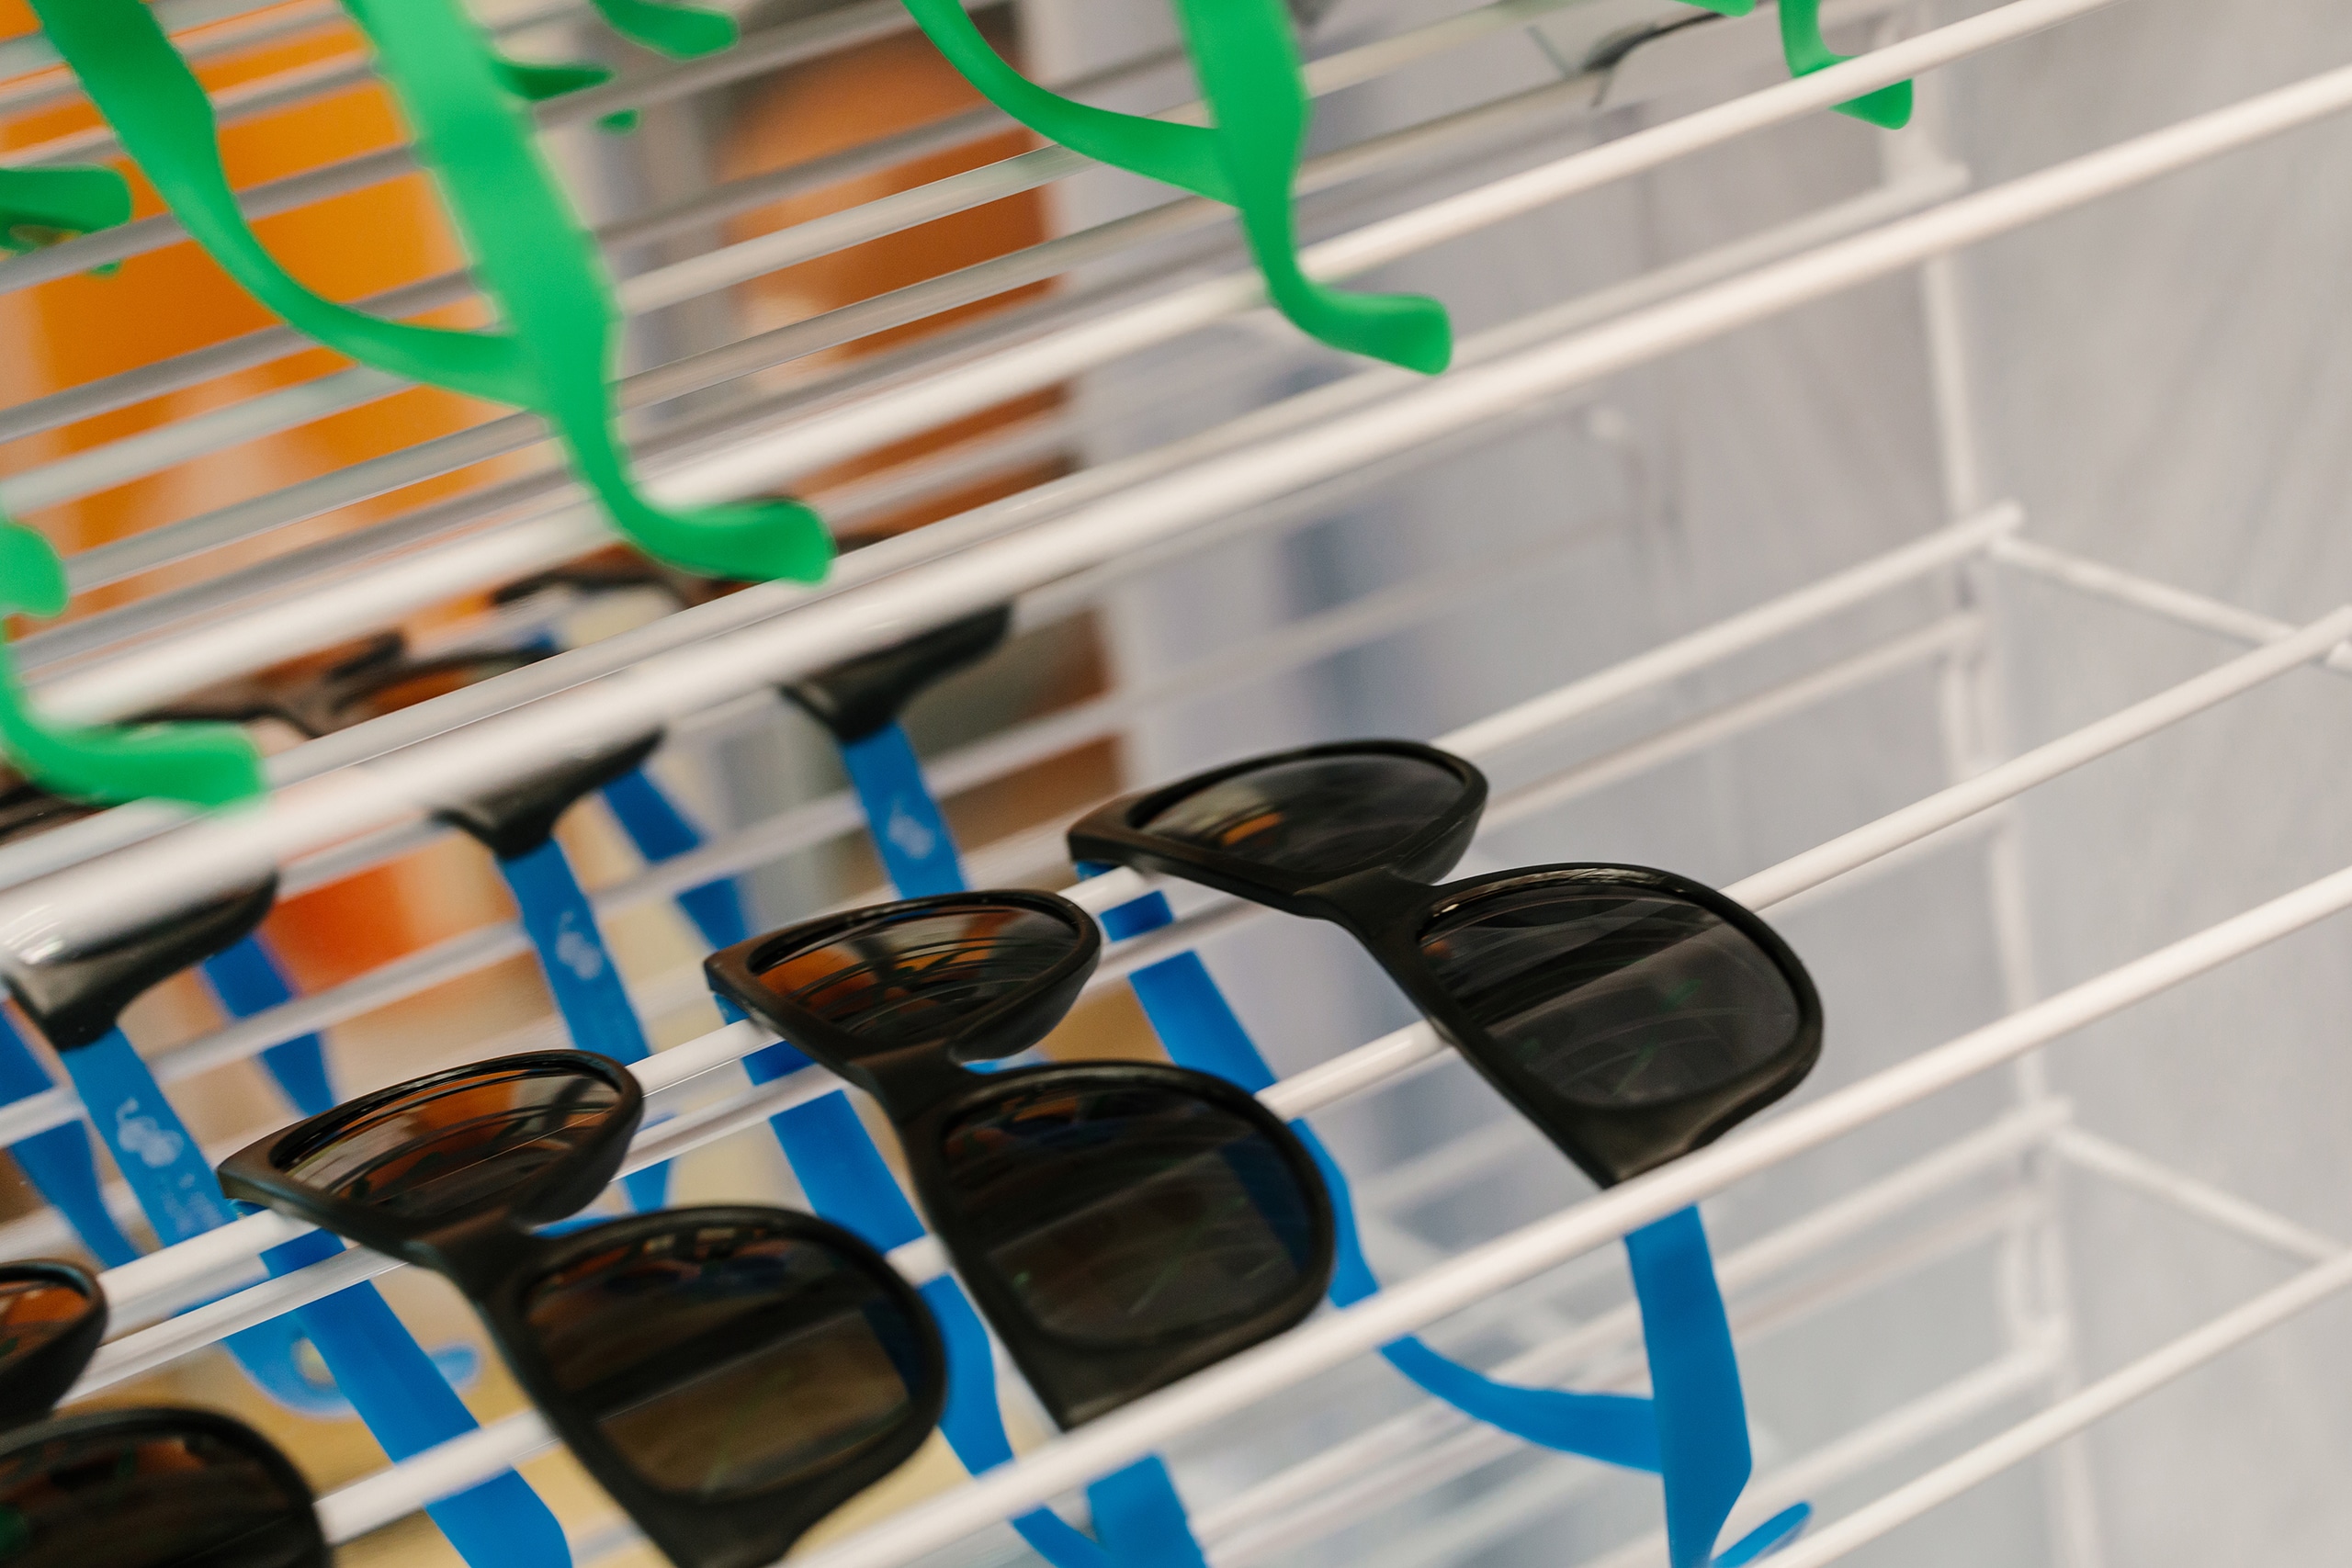 A rack with many pairs of sunglasses.